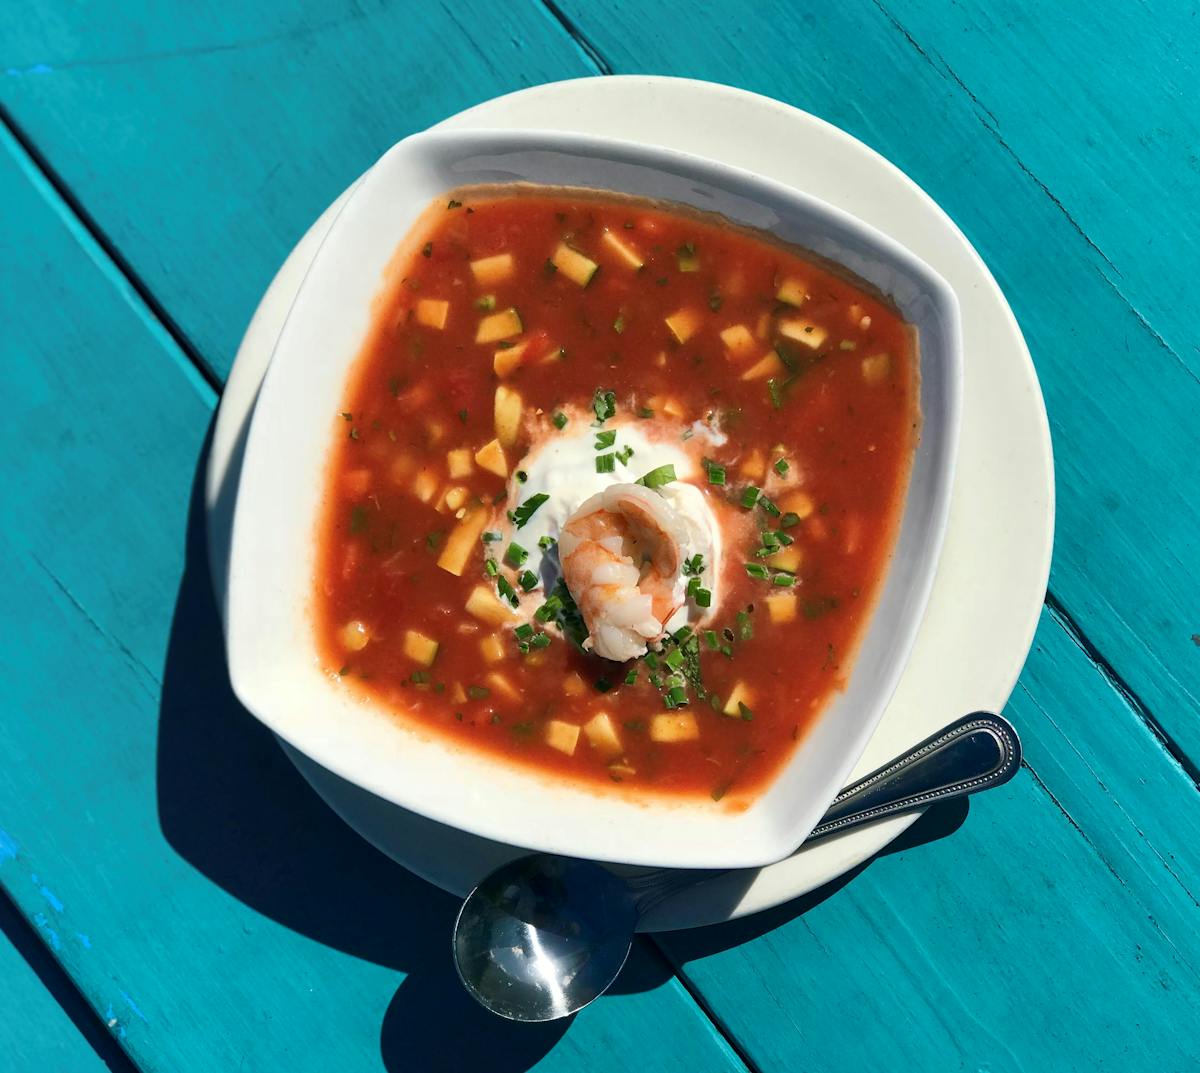 a bowl of soup on a blue plate